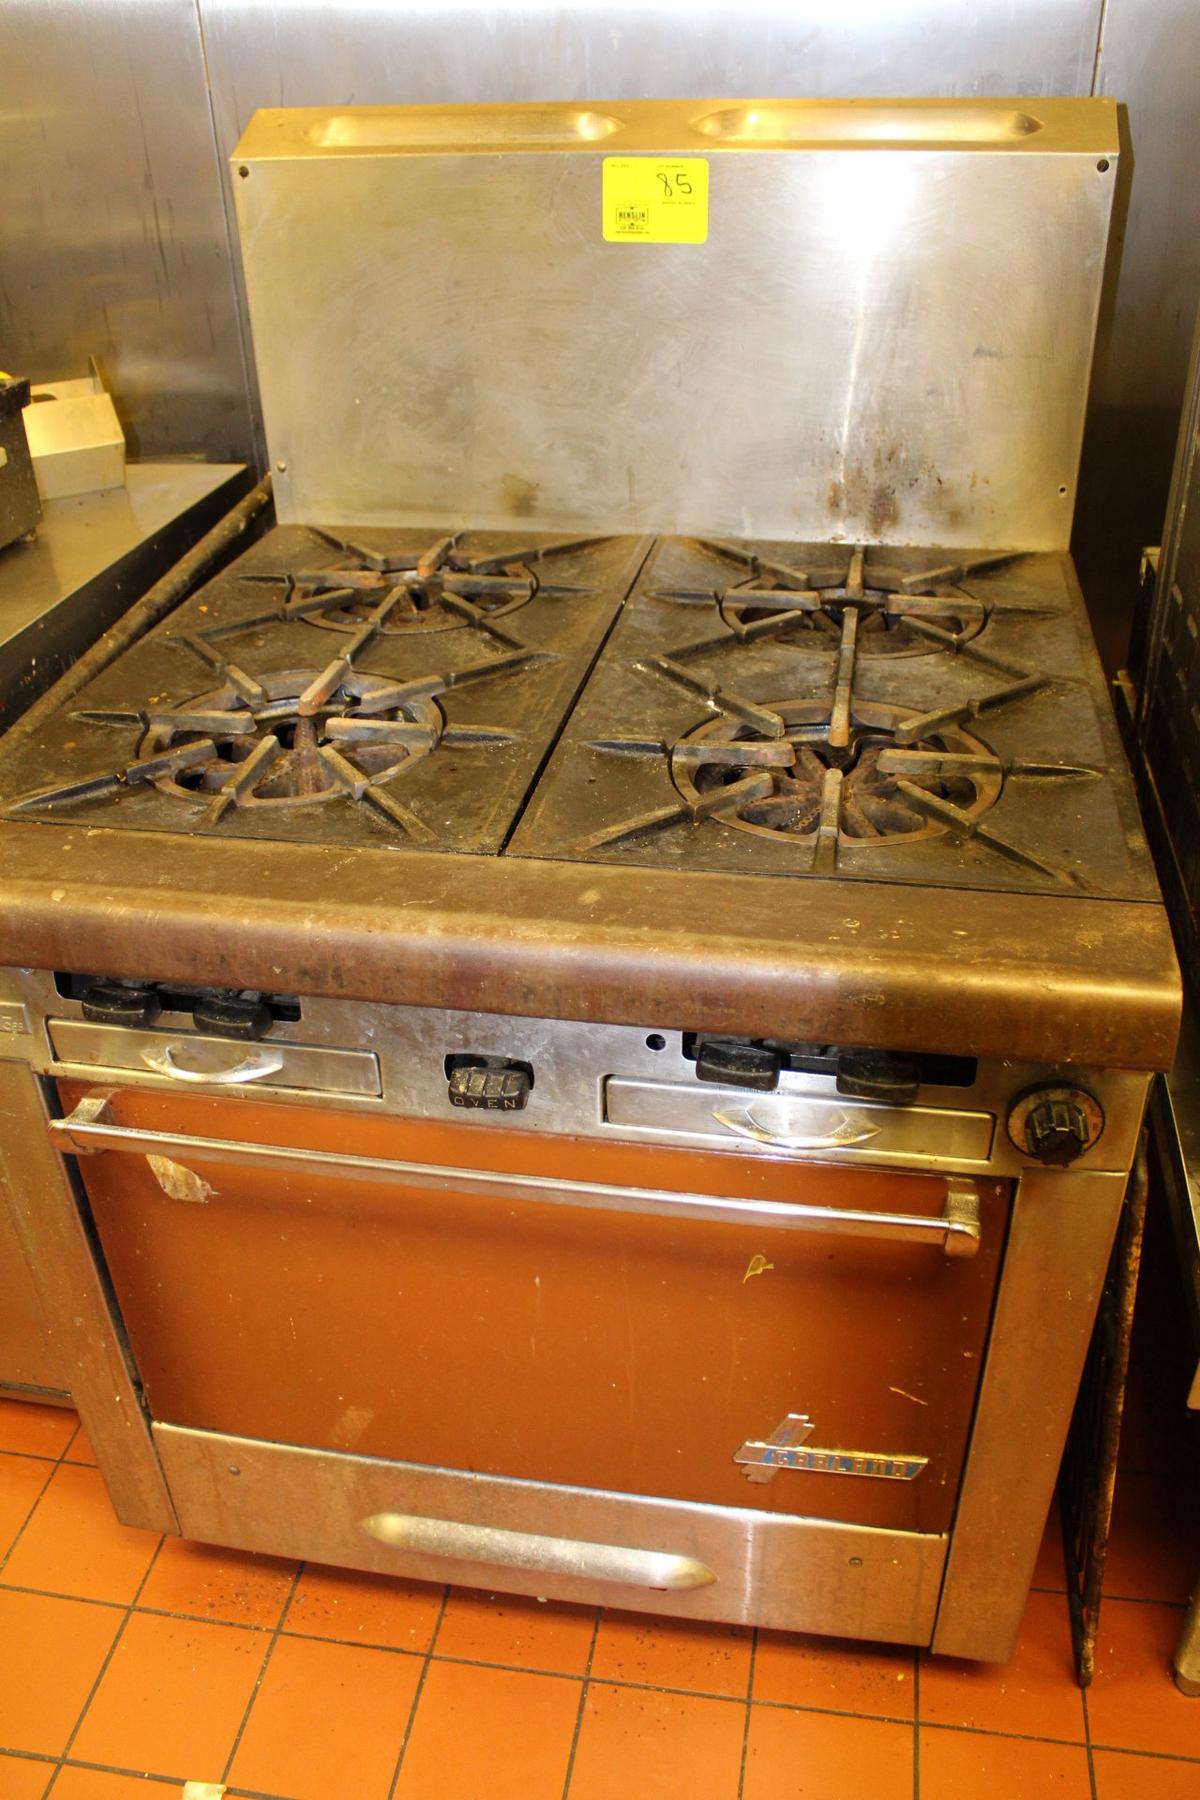 CARLAND 4 GAS STOVE/OVEN